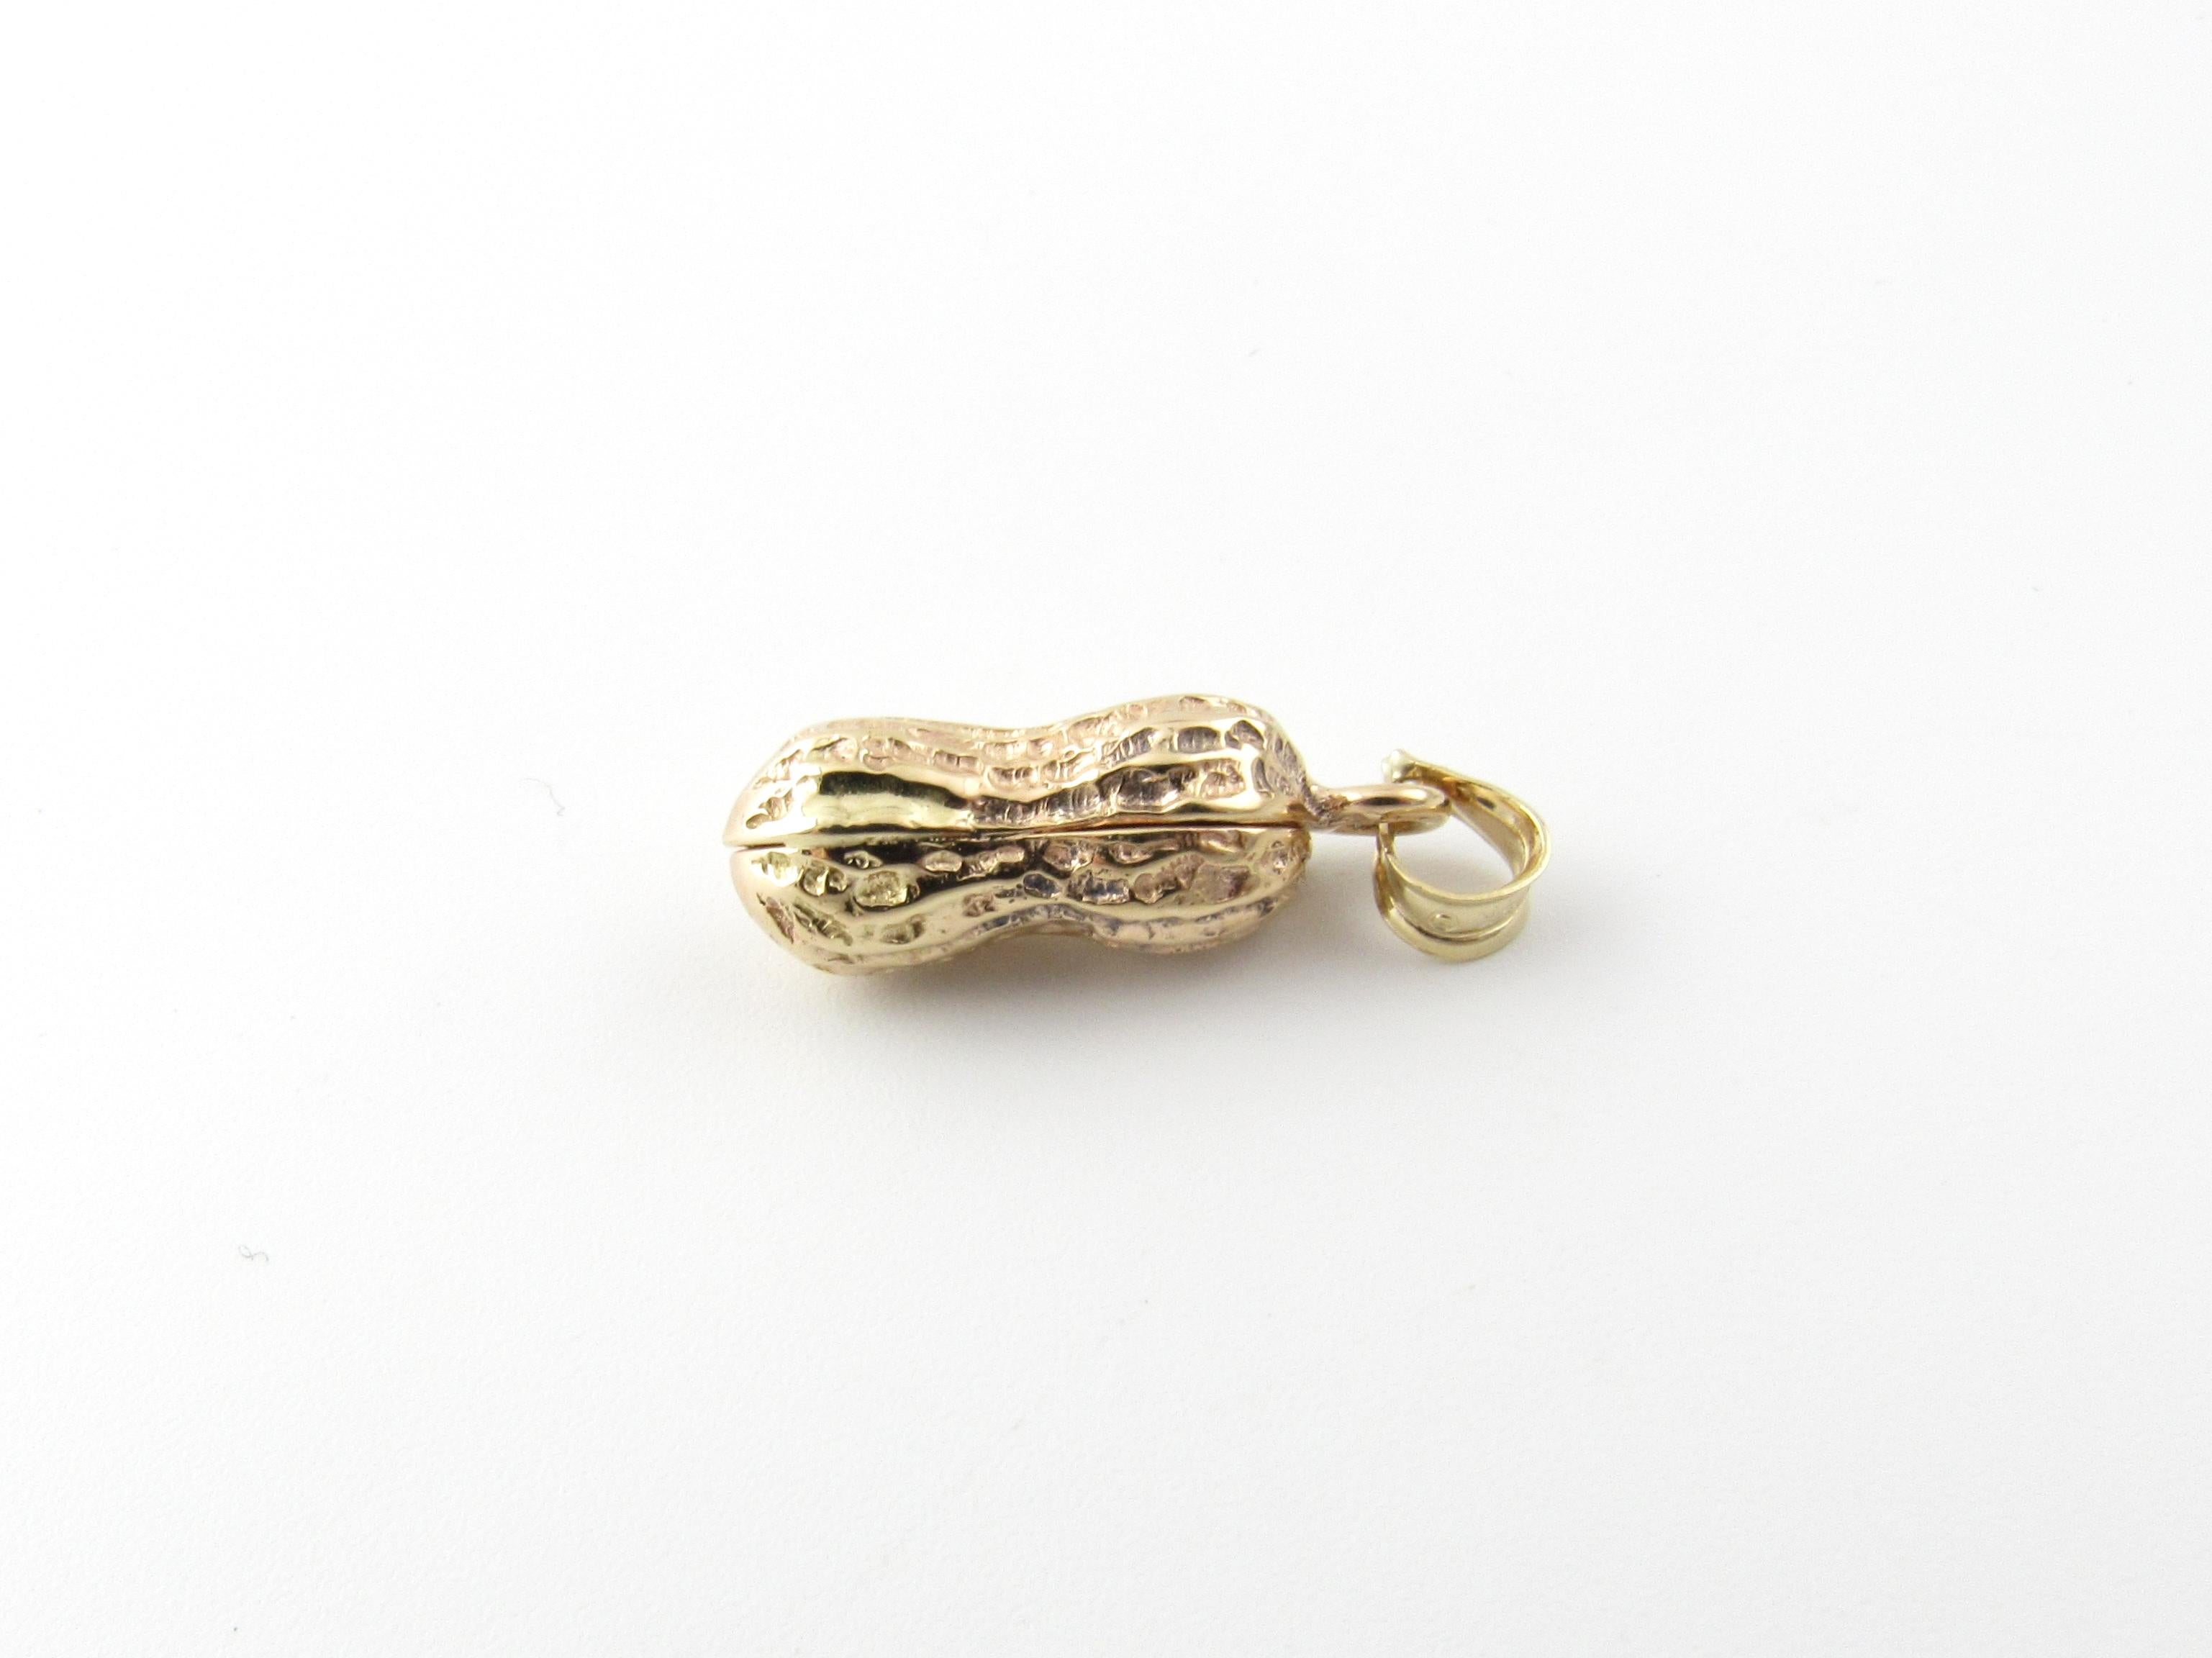 Vintage 14 Karat Yellow Gold Peanut Charm

The peanut represents good fortune and fertility!

This lovely 3D charm features a miniature peanut meticulously detailed in 14K yellow gold.

Size: 20 mm x 7 mm (actual charm)

Weight: 1.6 dwt. / 2.5